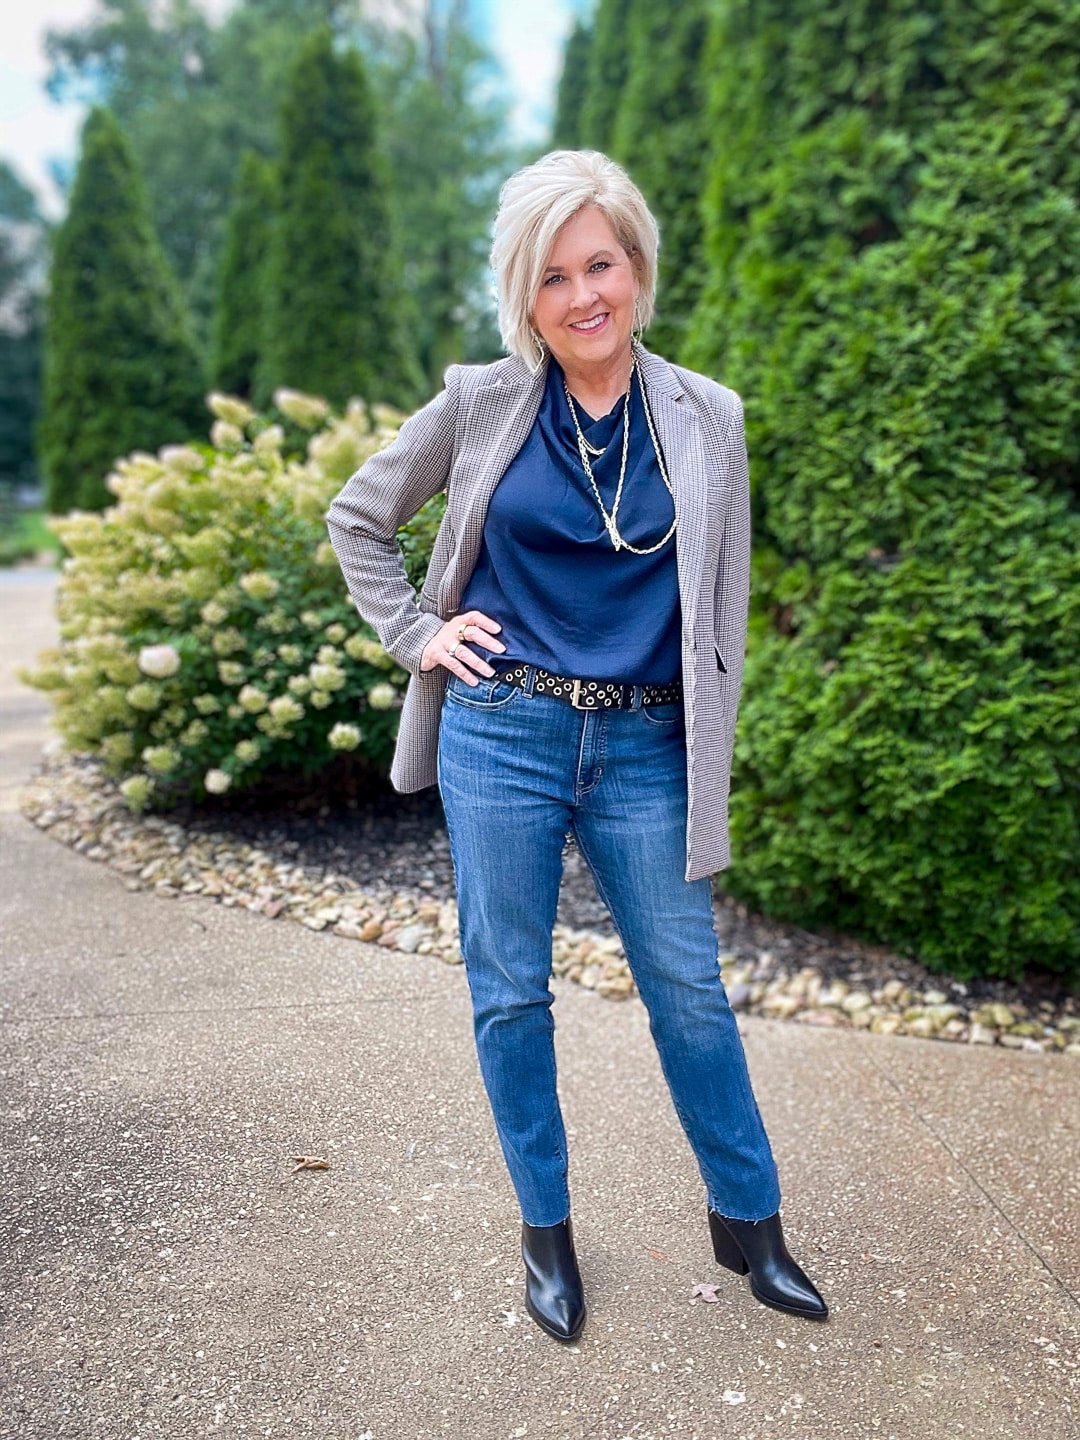 Over 40 Fashion Blogger, Tania Stephens is styling jeans for a western style 11